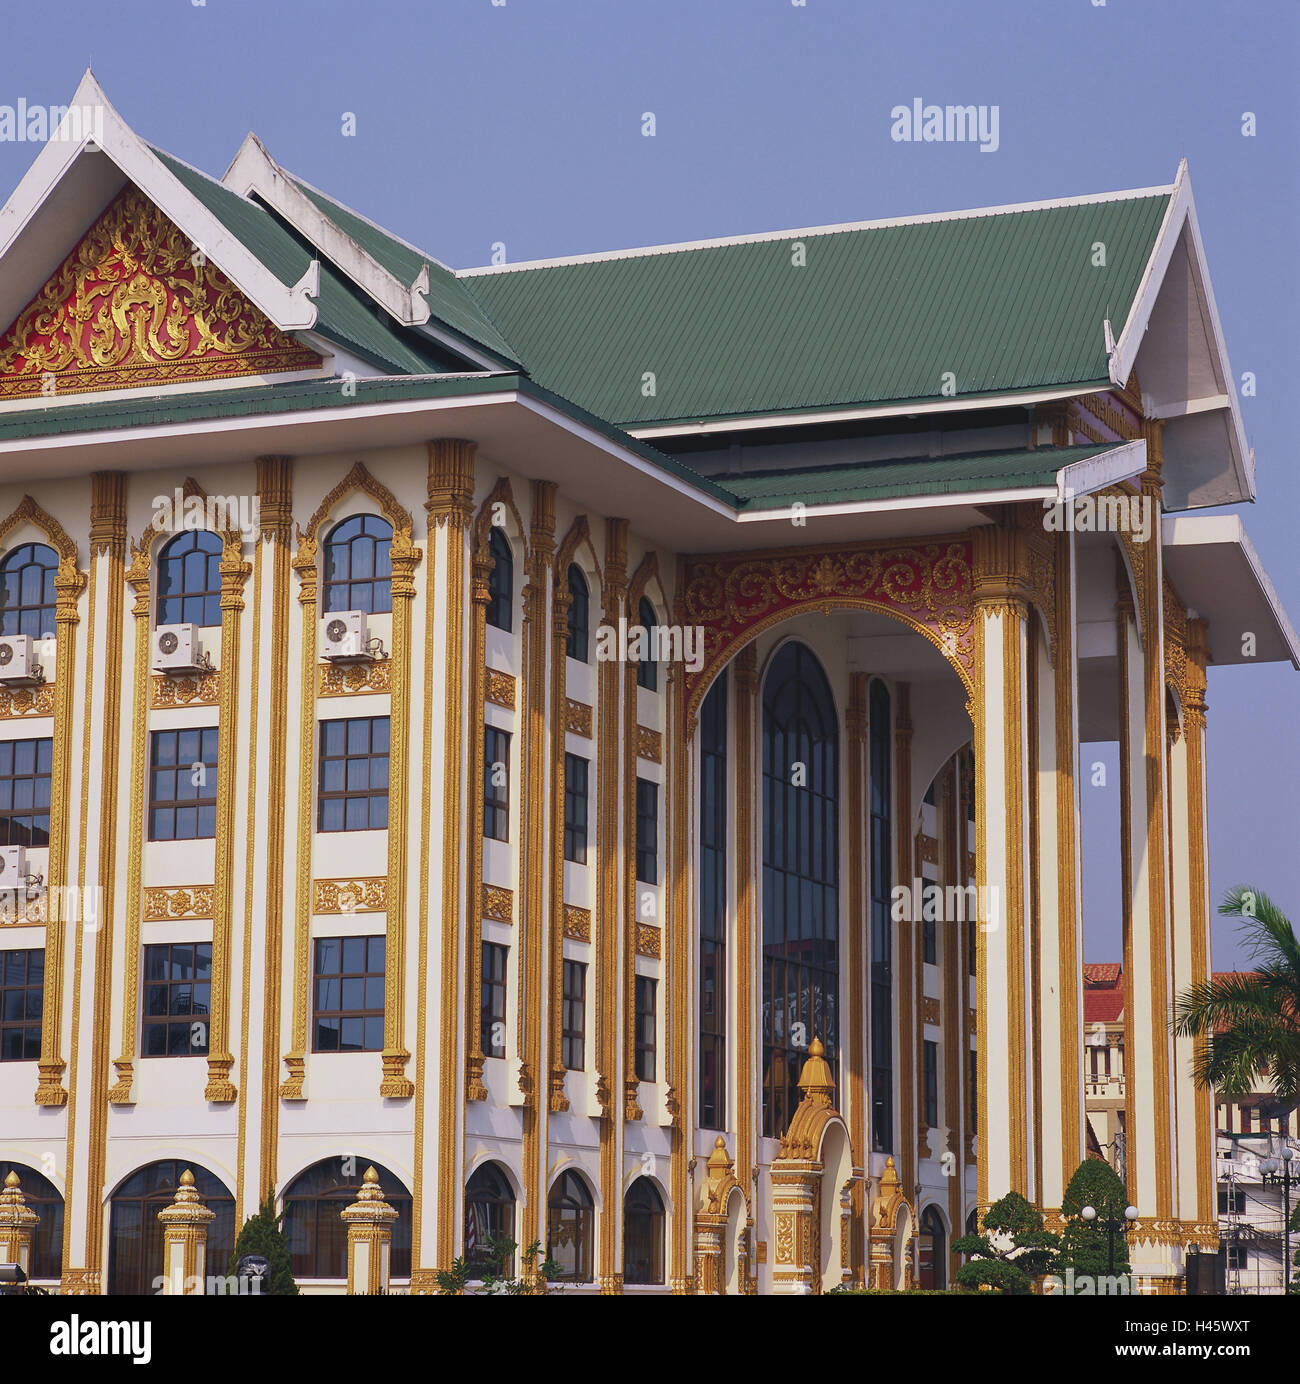 Laos, Vientiane, Lao National Culture Hall, Asia, South-East Asia, town, capital, destination, place of interest, culture, building, structure, architecture, facade, architectural style, typically, typically for country, Stock Photo